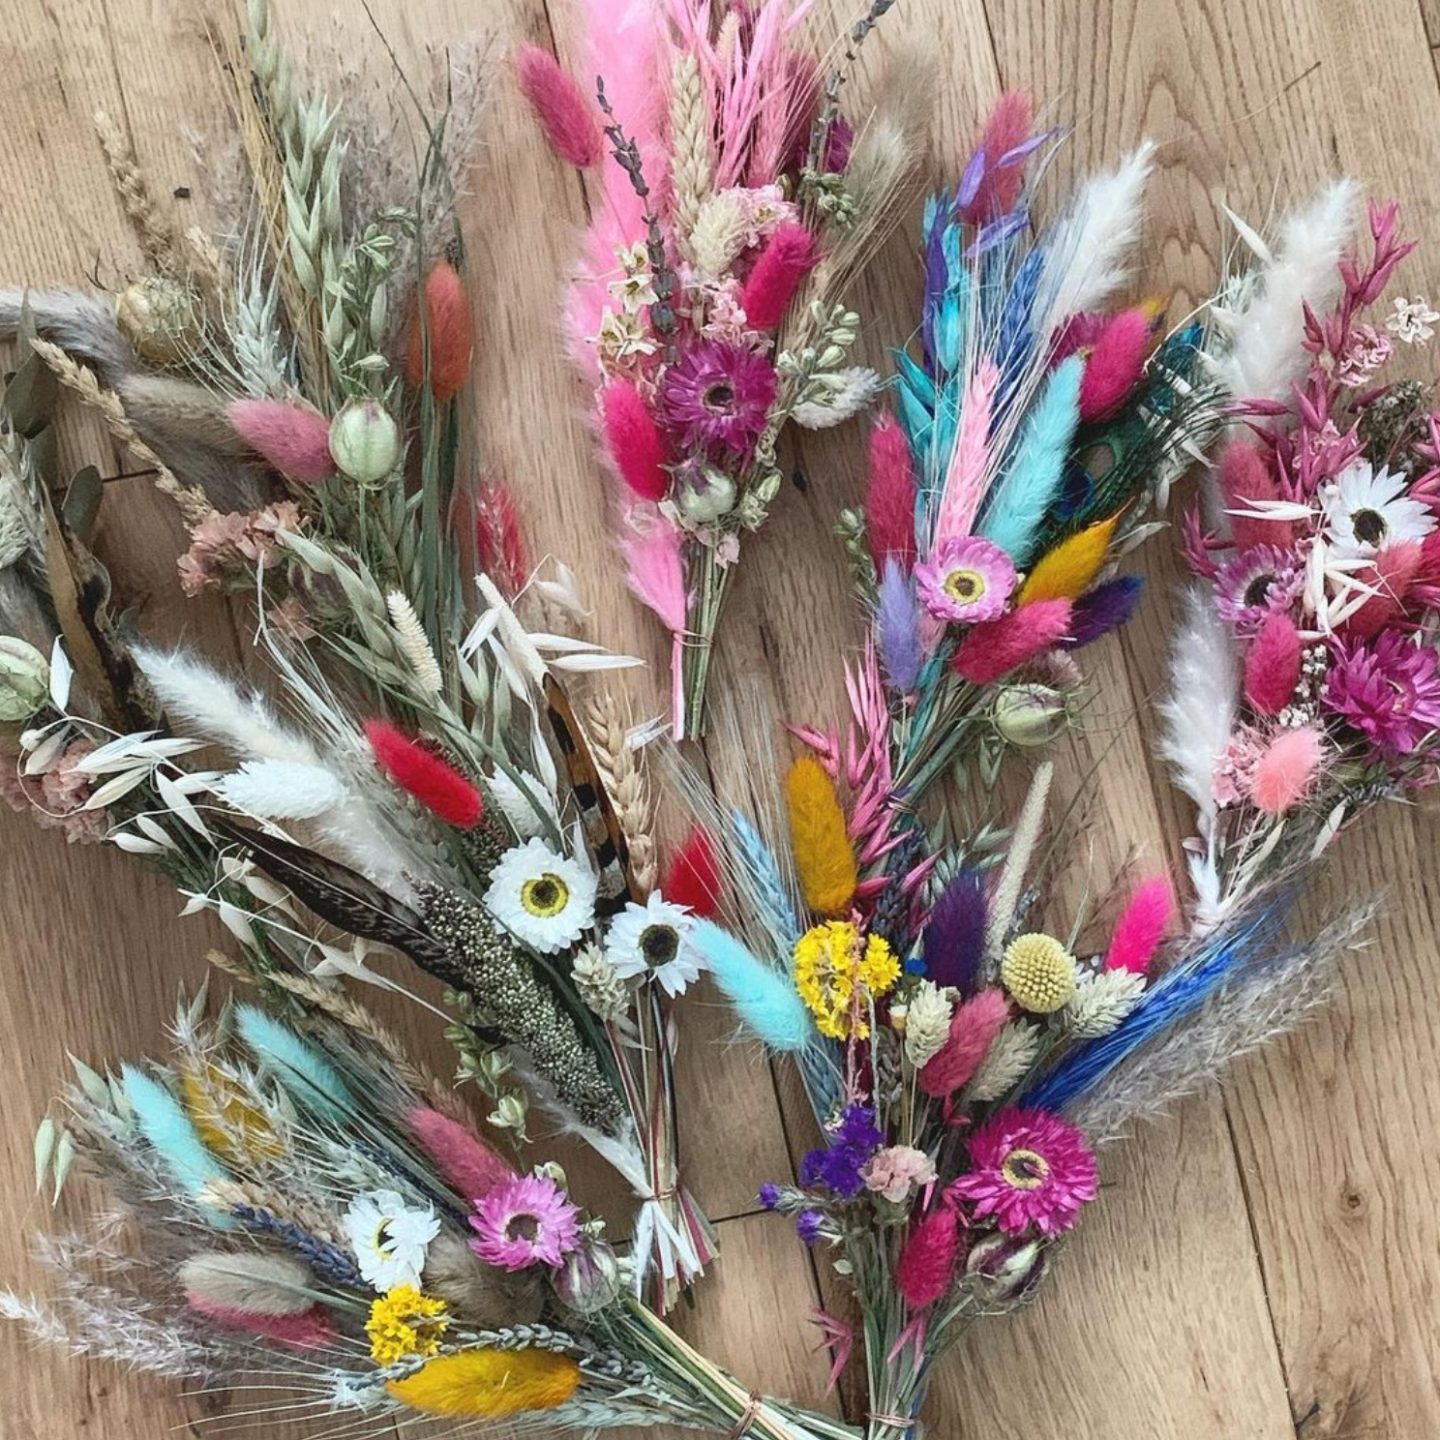 Dried Flowers, ethical gifts 